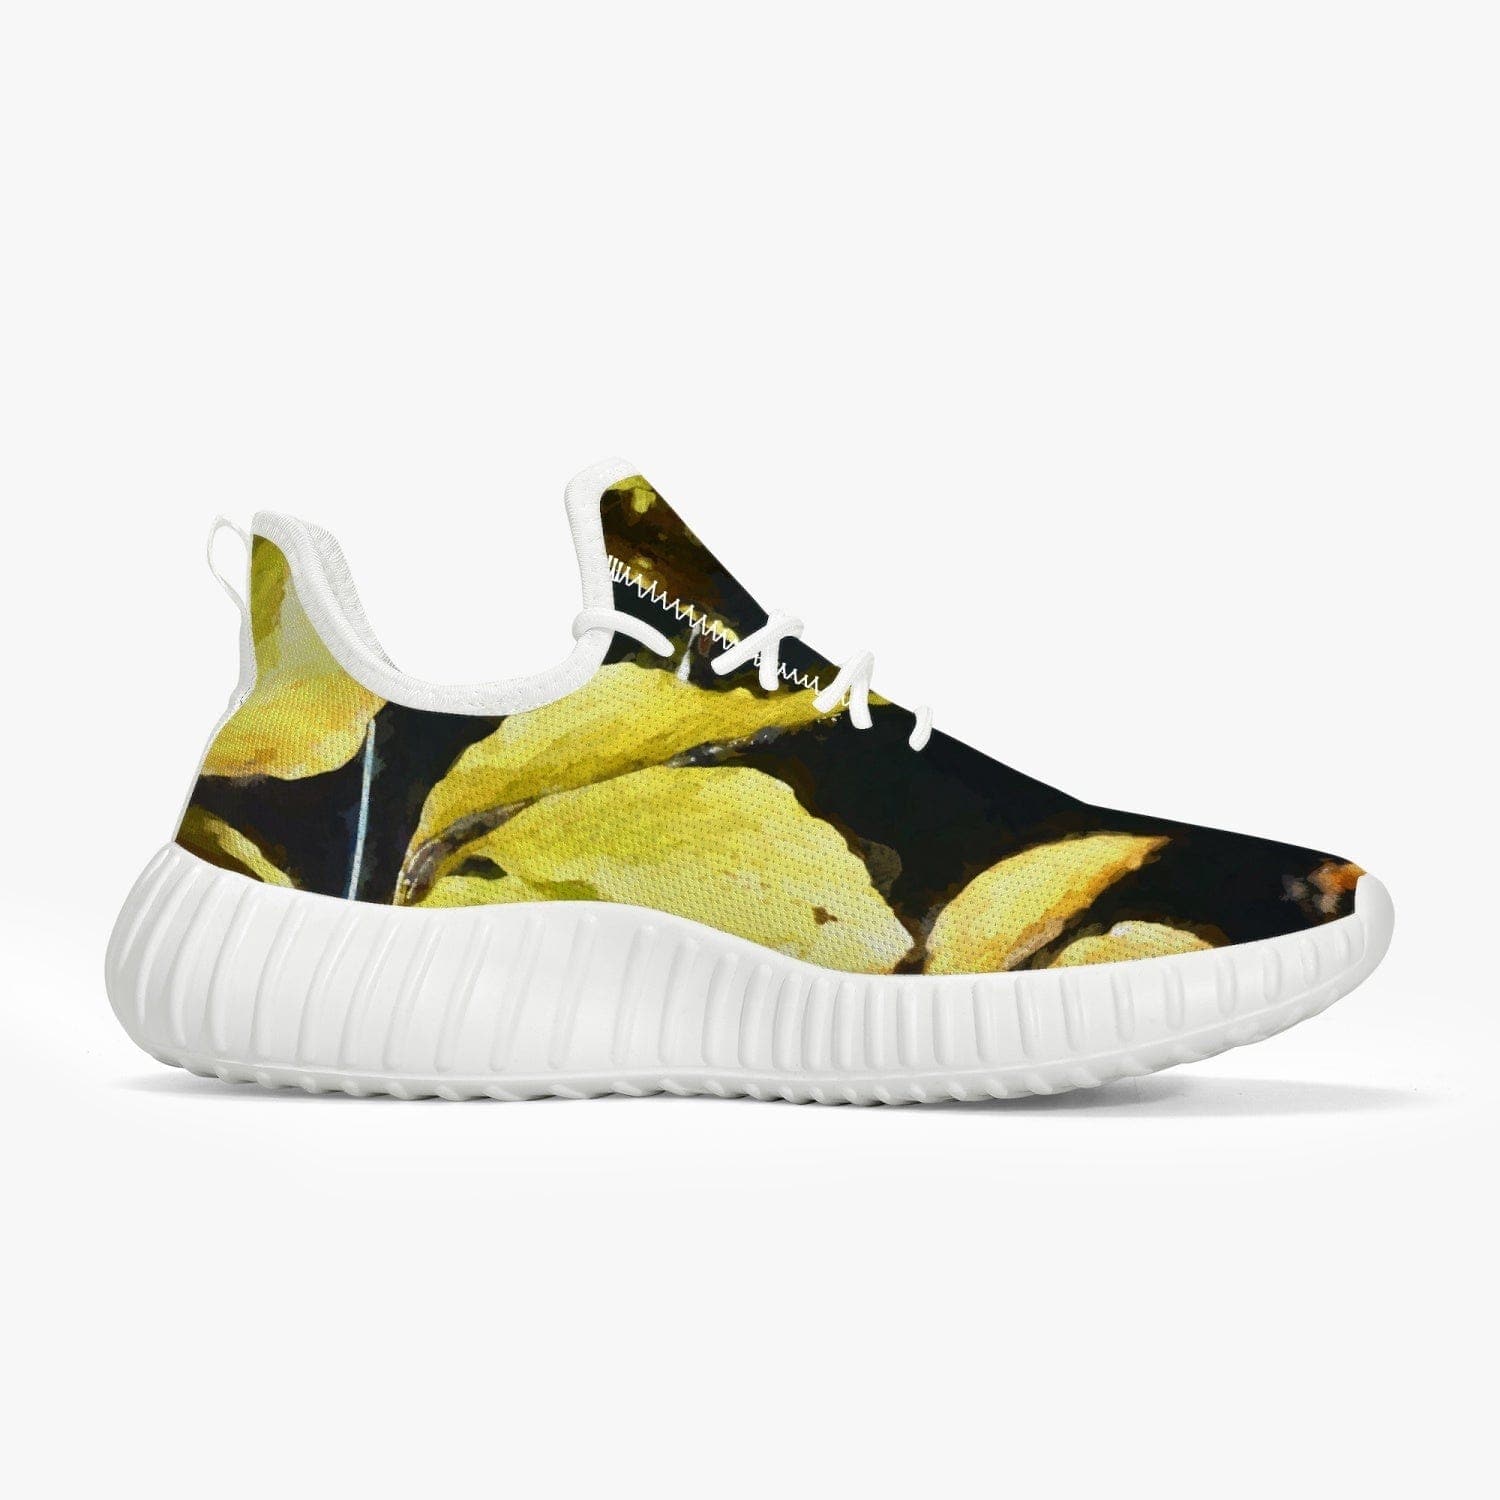 Yellow beech leafes. Mesh Knit Sneakers - White/Black, designed for Sensus Studio